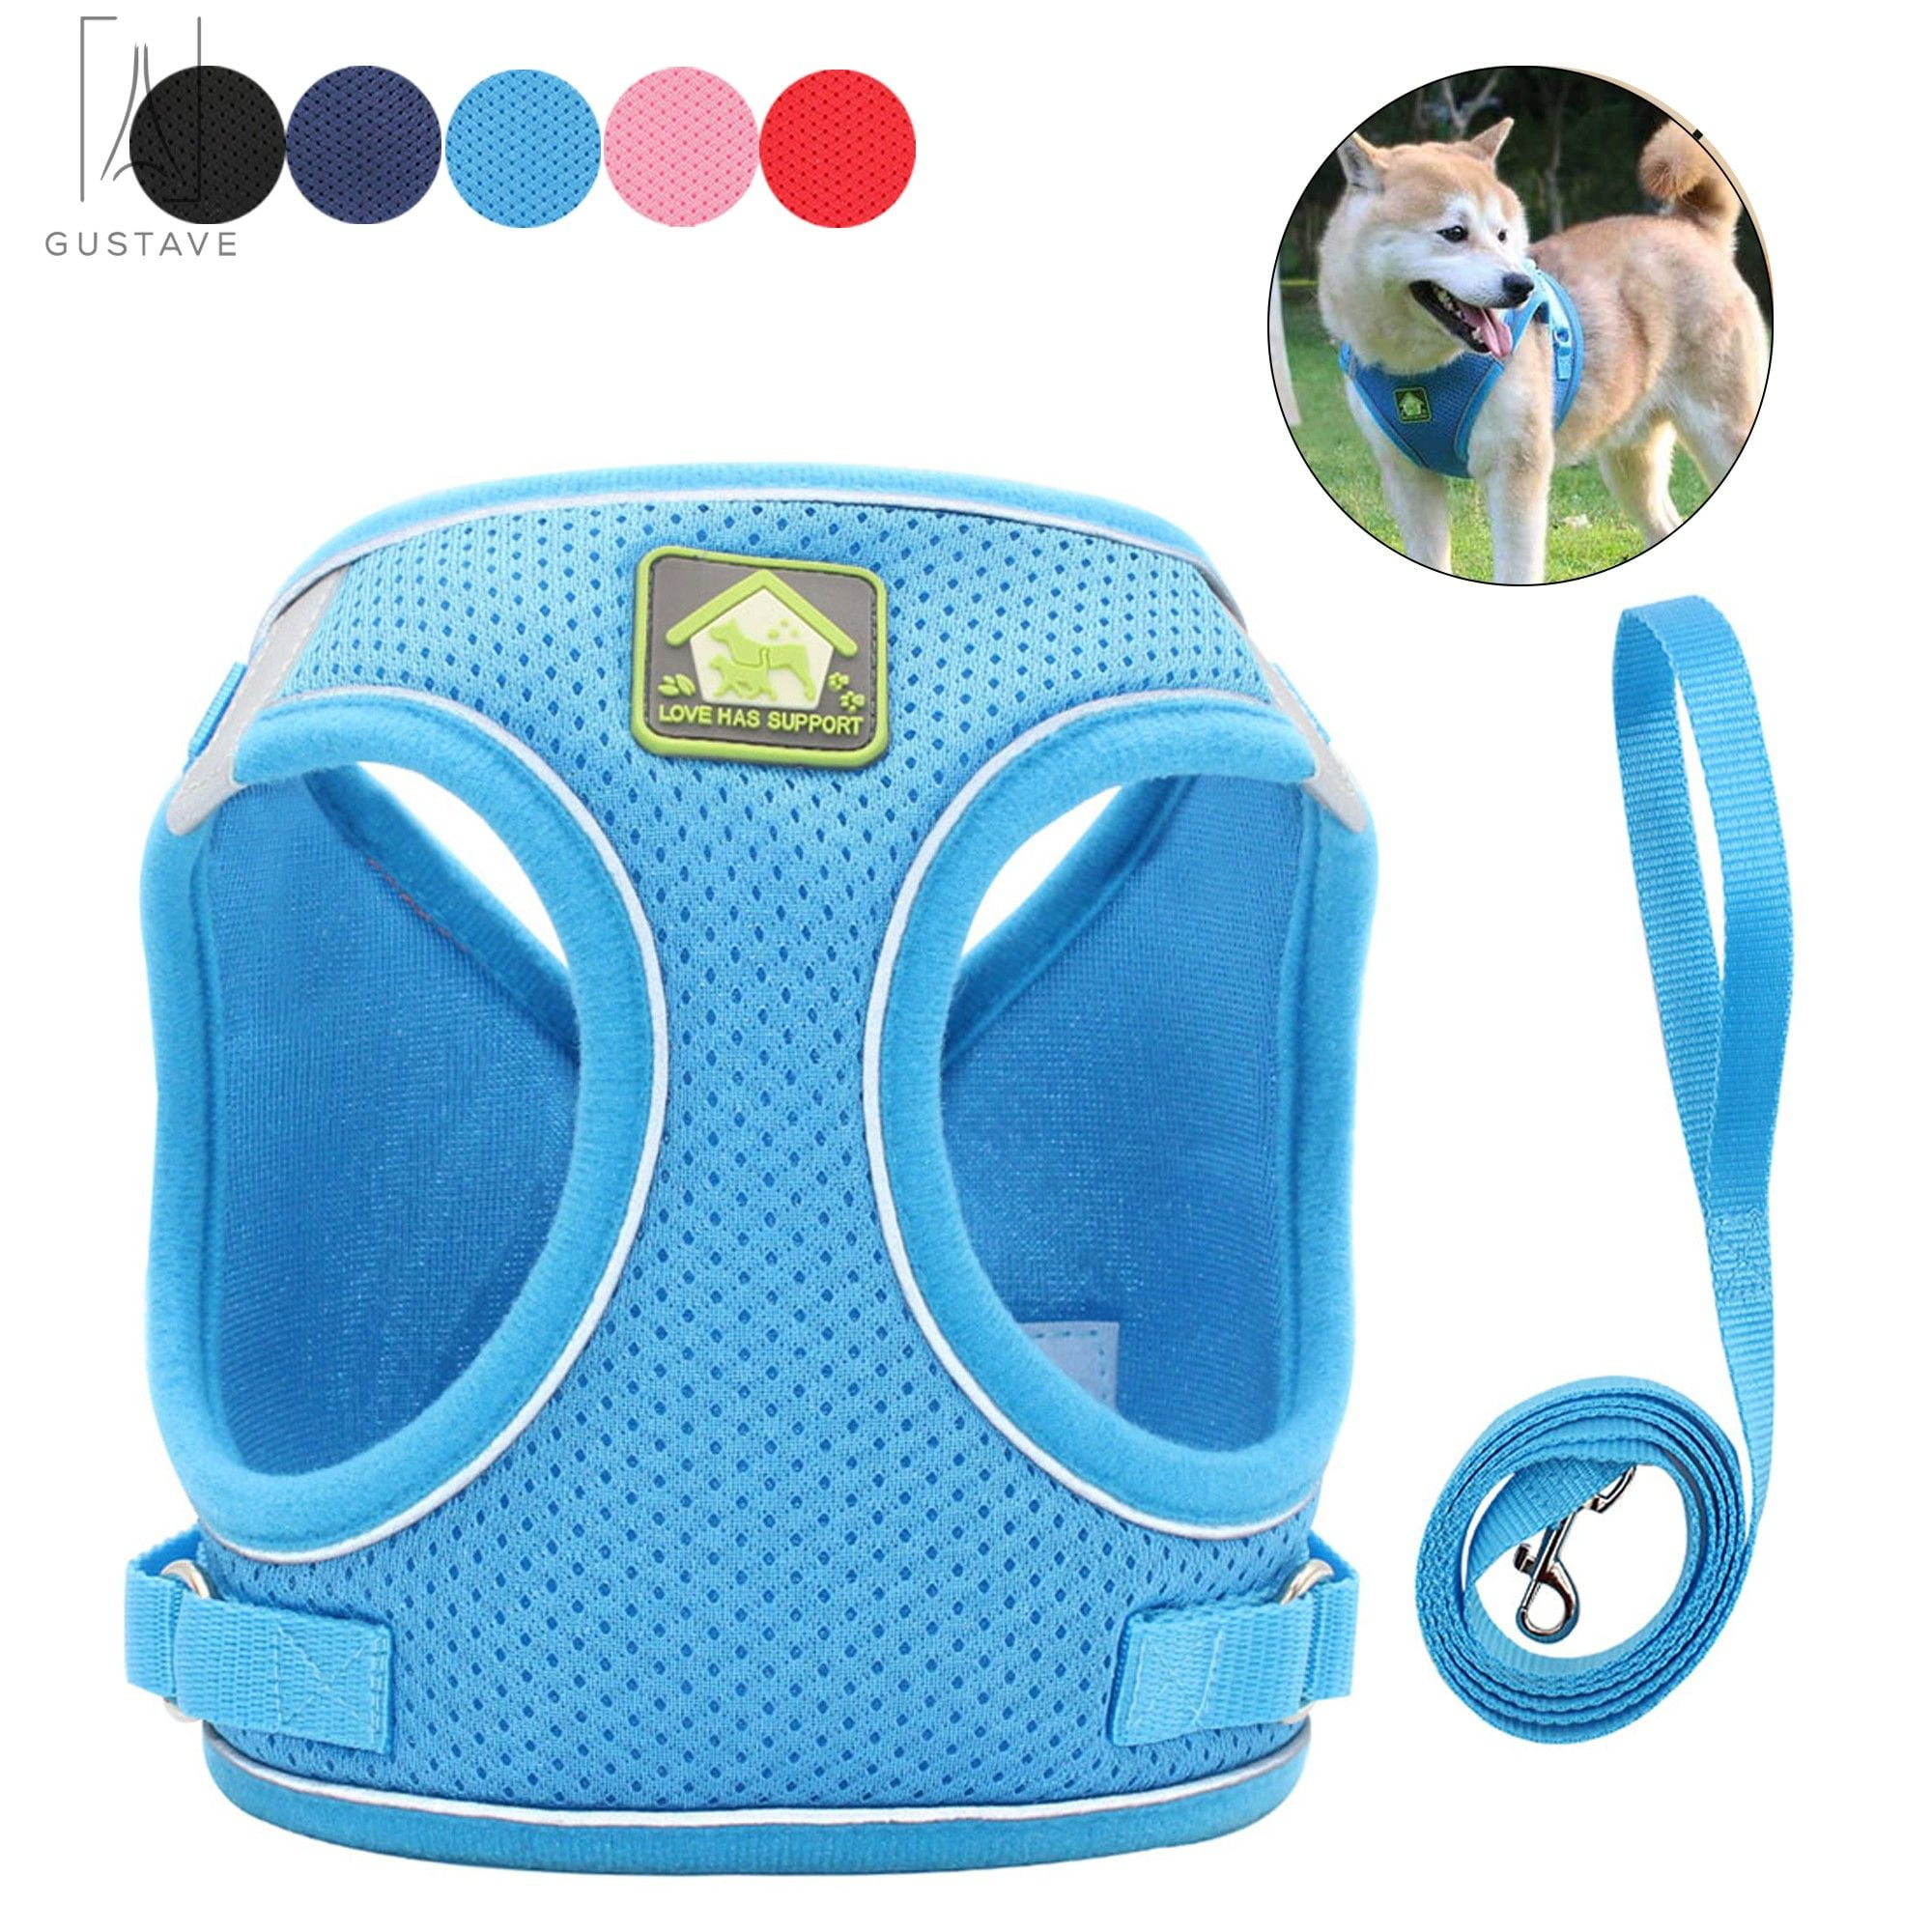 Soft Padded Breathable Air Mesh Dog Car Harness & Leash Paw Print for Dog Travel 